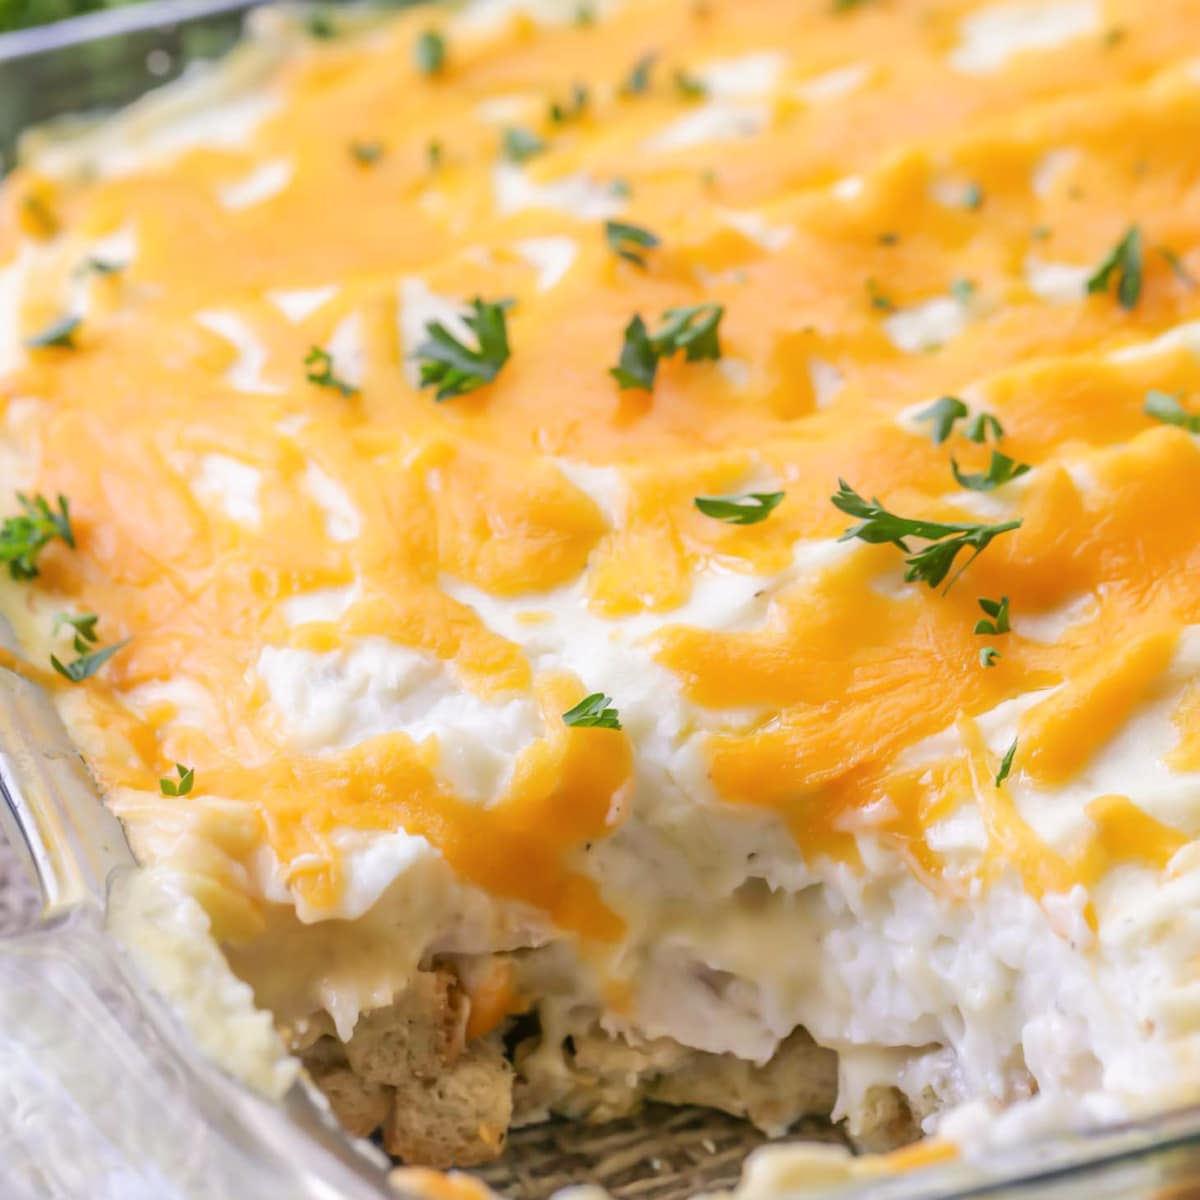 Fall dinner ideas - Thanksgiving leftover casserole with missing scoop.